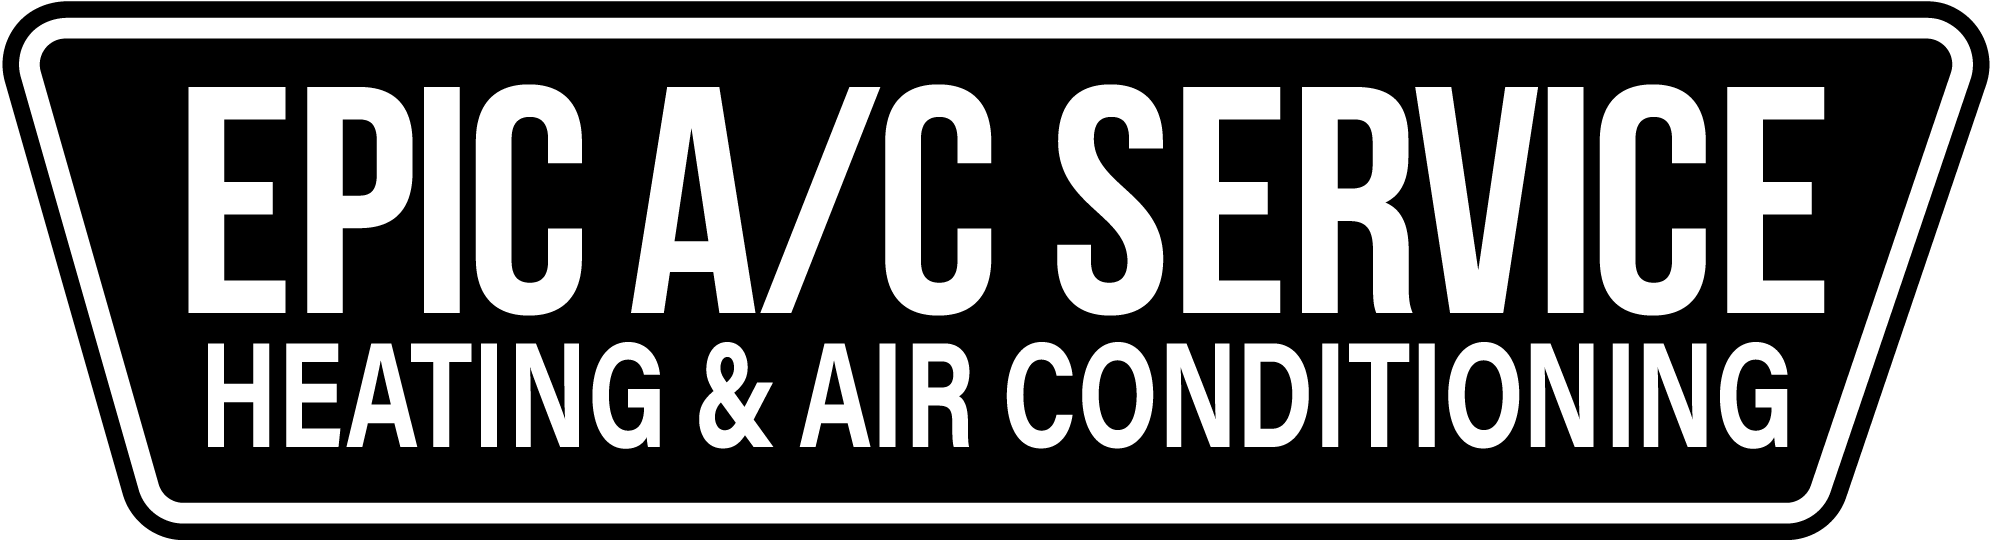 Epic A/C Service Heating & Air Conditioning Logo | EpicACGuy.com